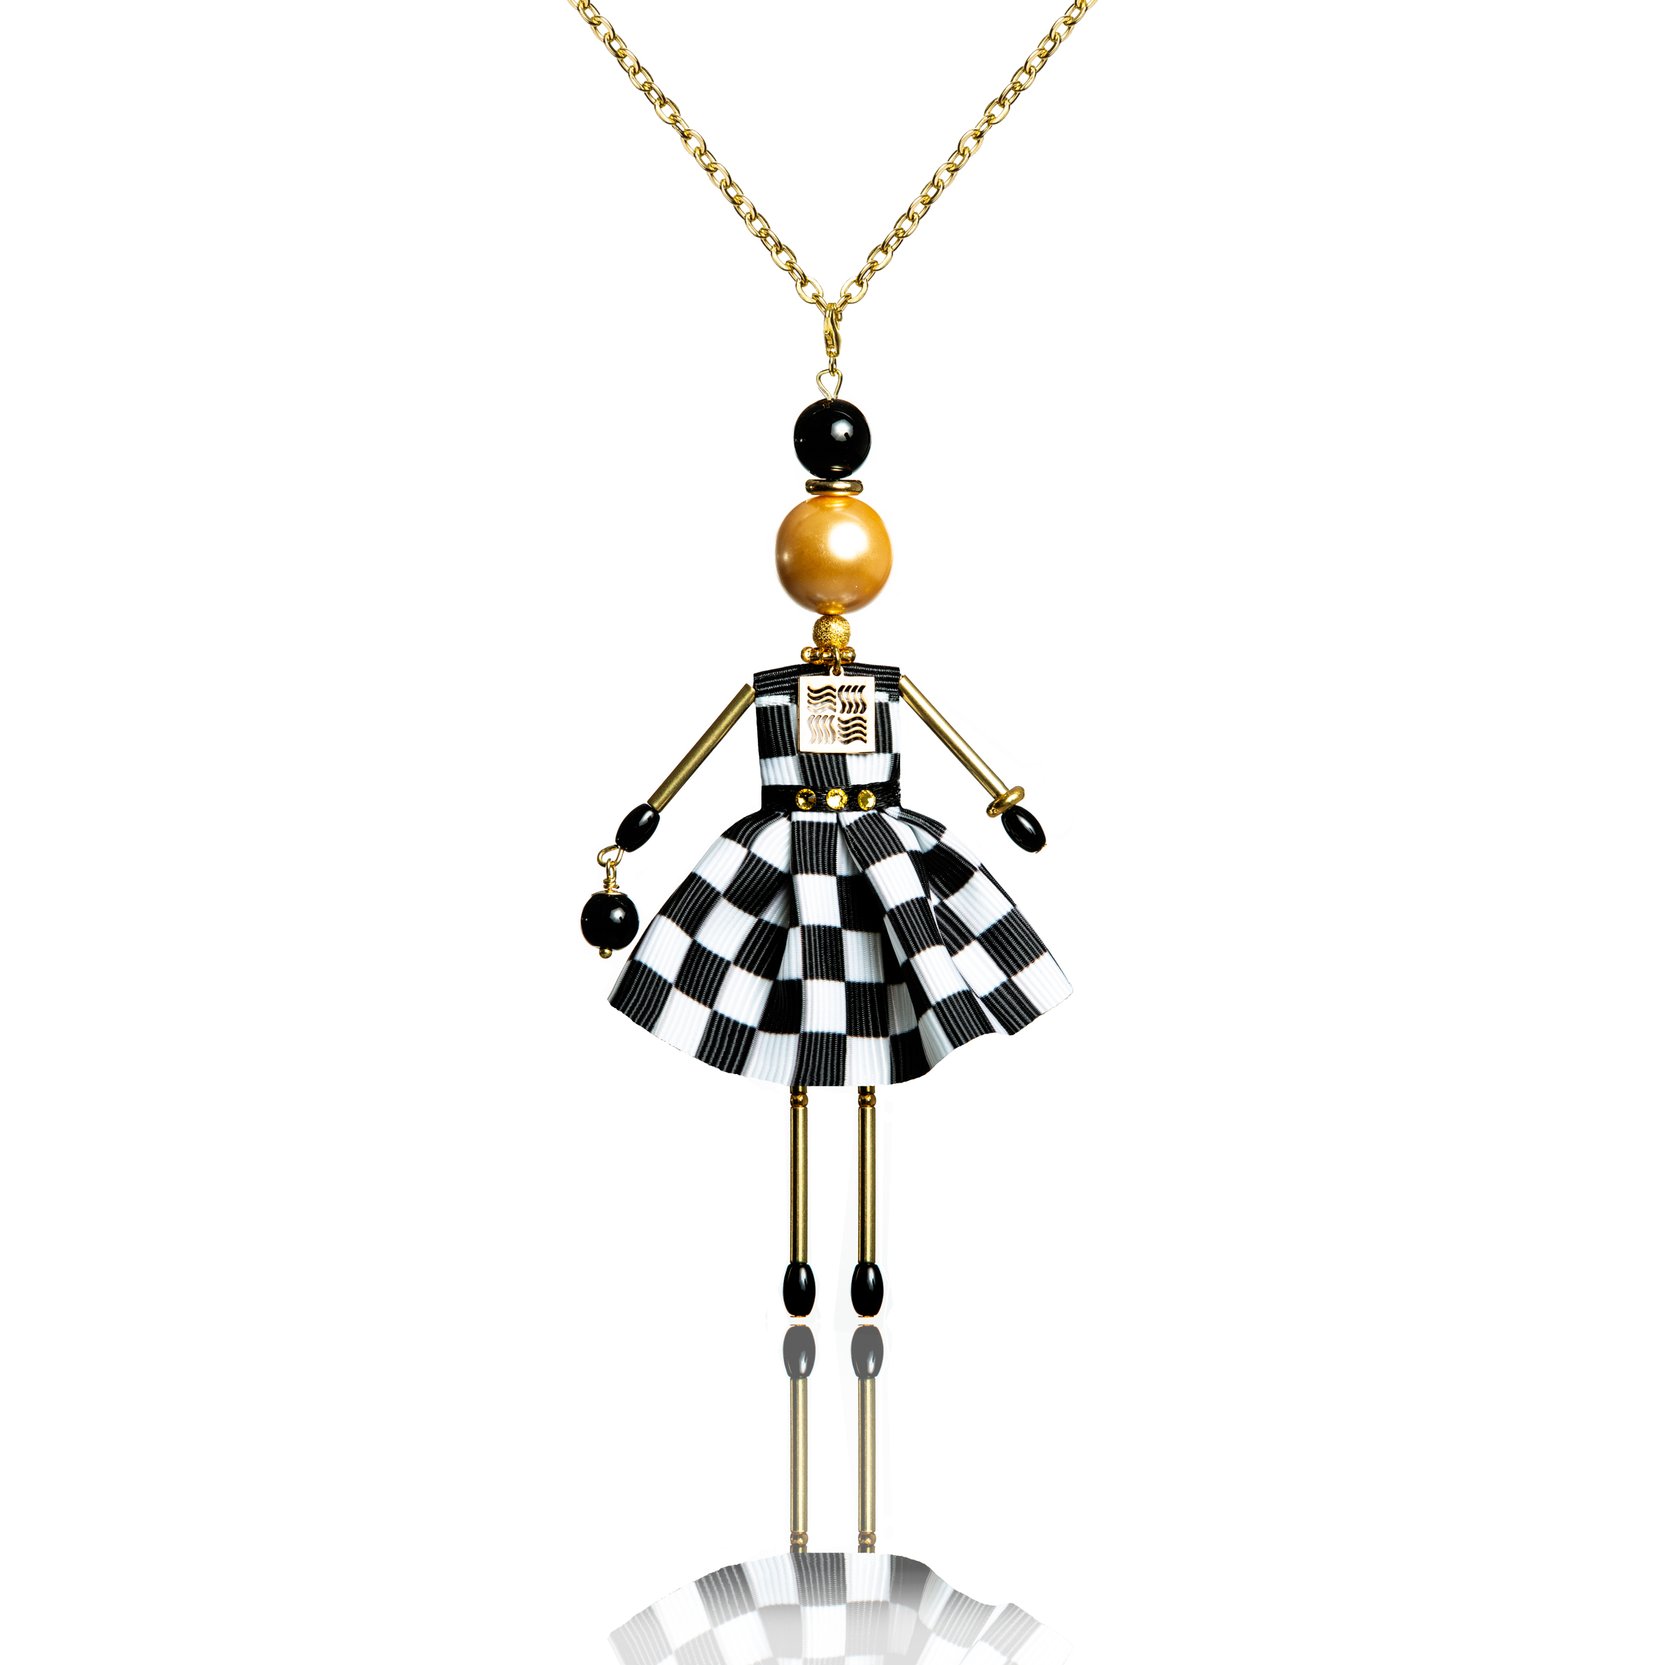 Exquisite pendant doll in a checkerboard print dress.